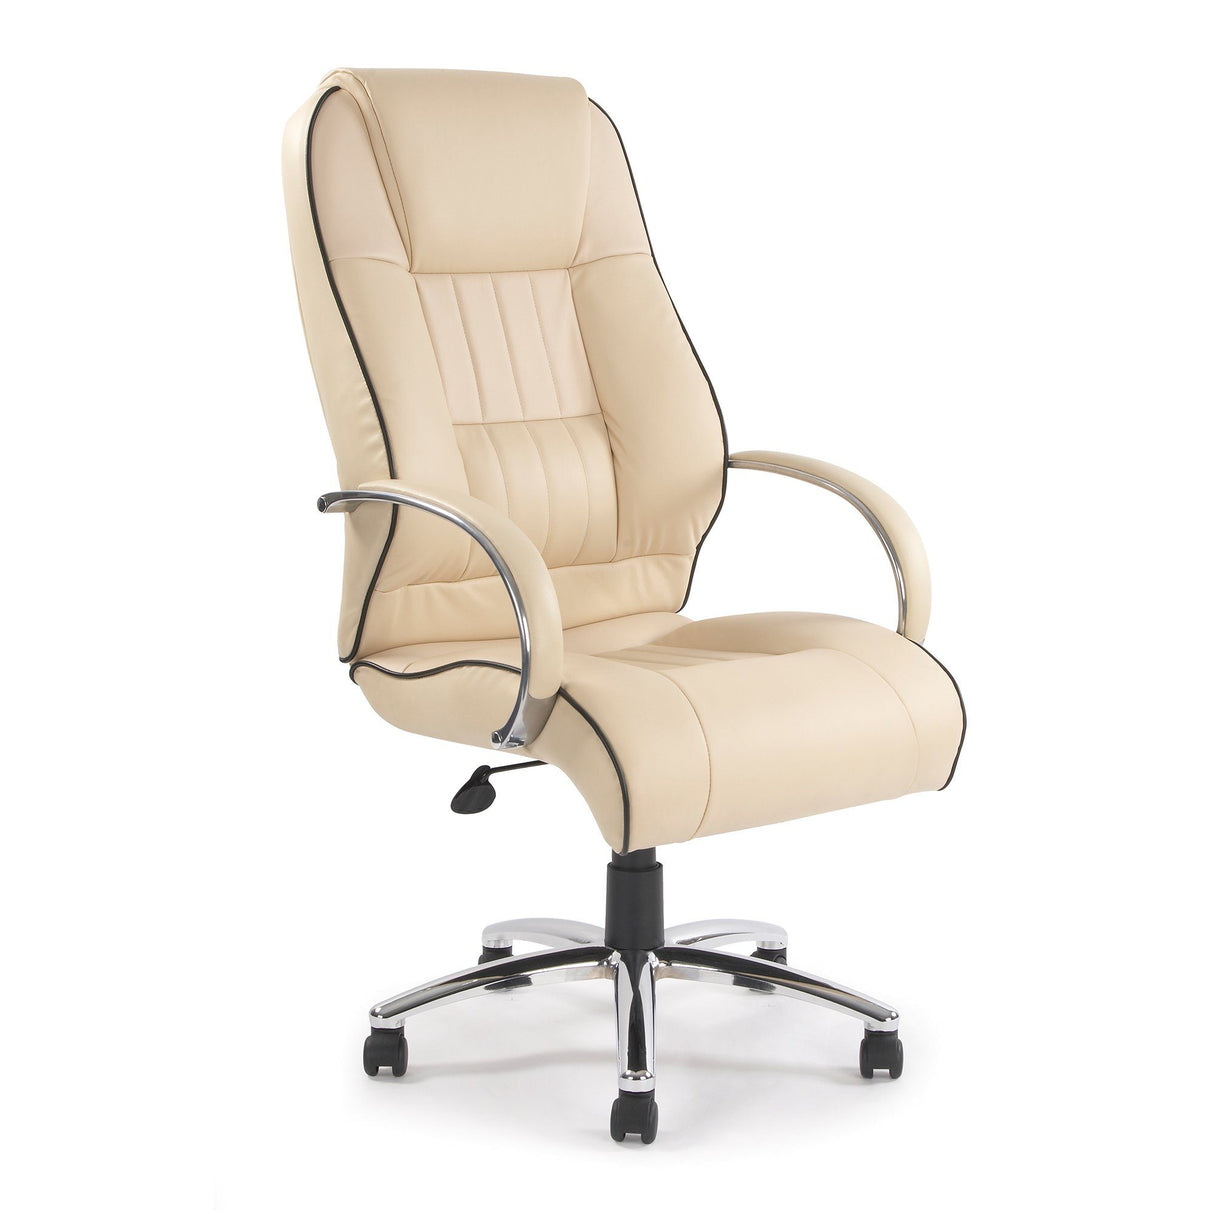 Nautilus Designs Dijon High Back Leather Faced Executive Armchair with Contrasting Piping and Chrome Base - Cream